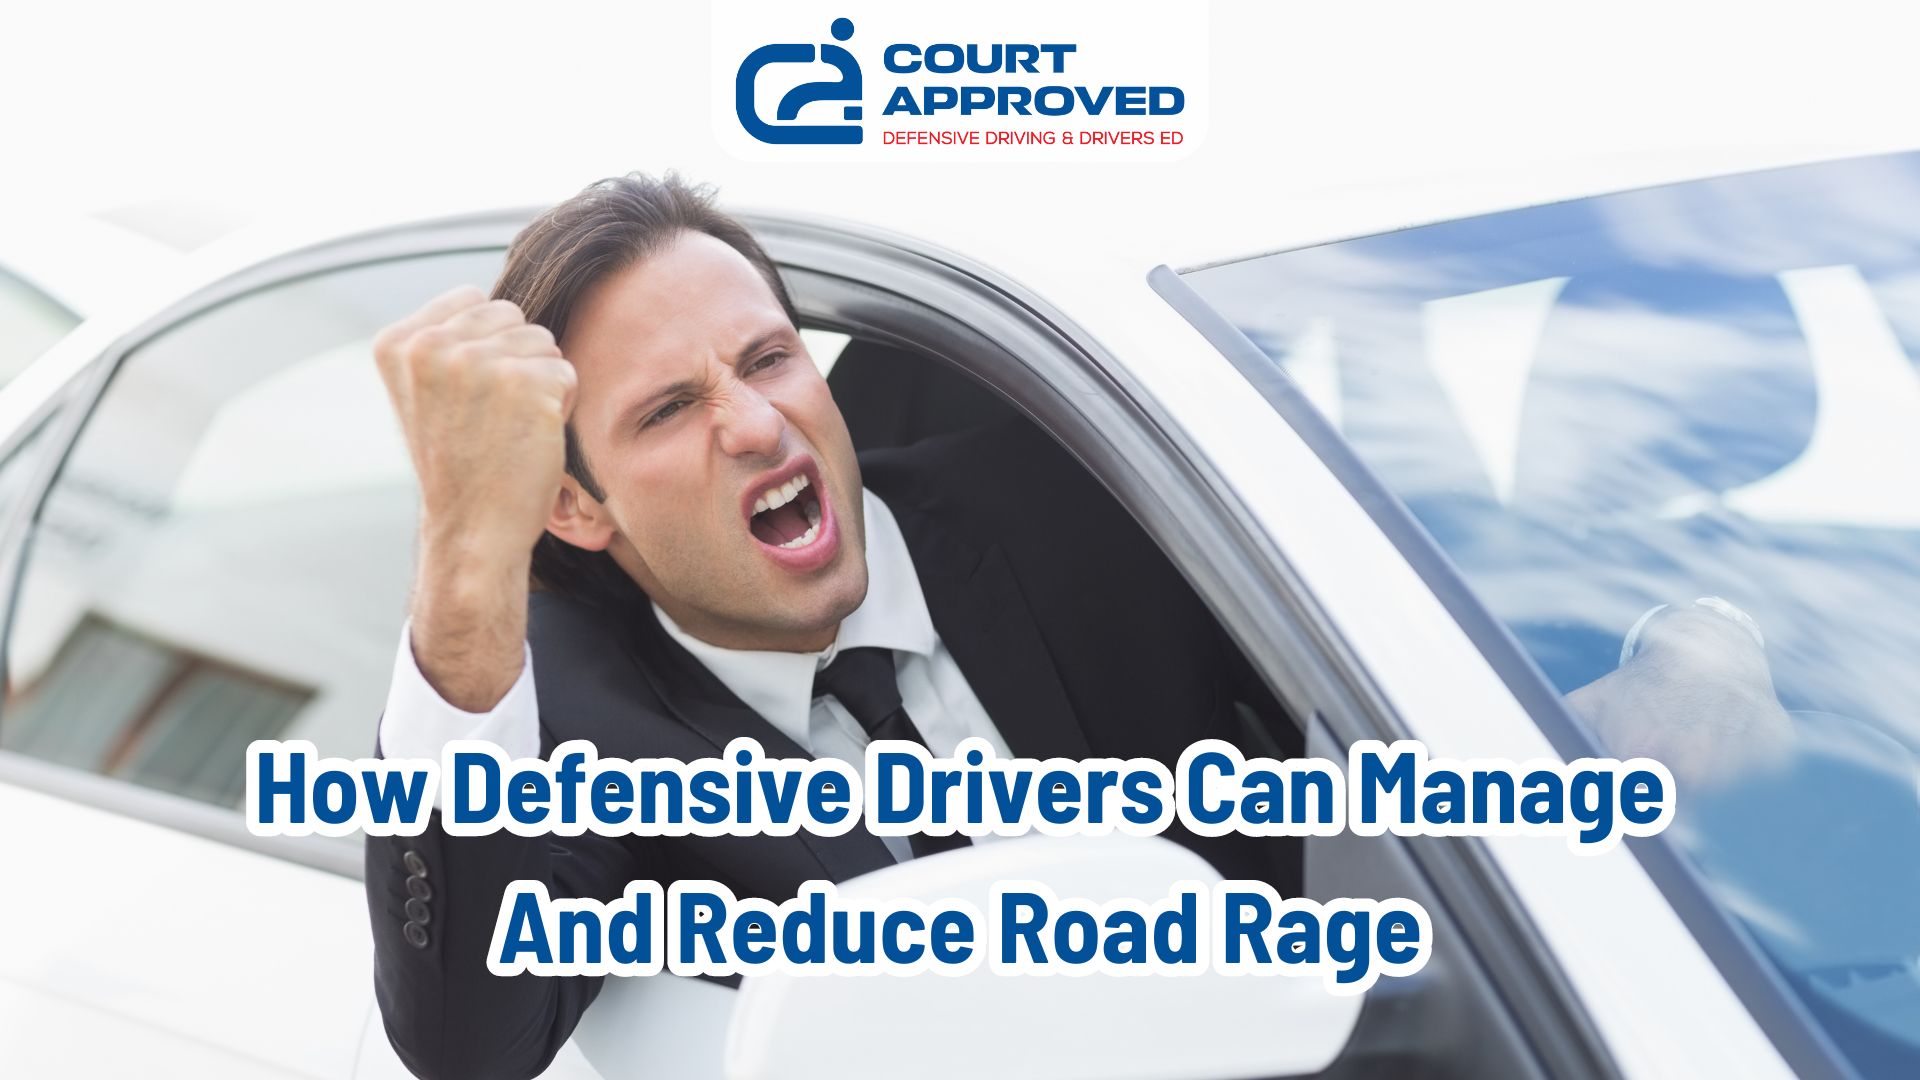 How Defensive Drivers Can Manage And Reduce Road Rage